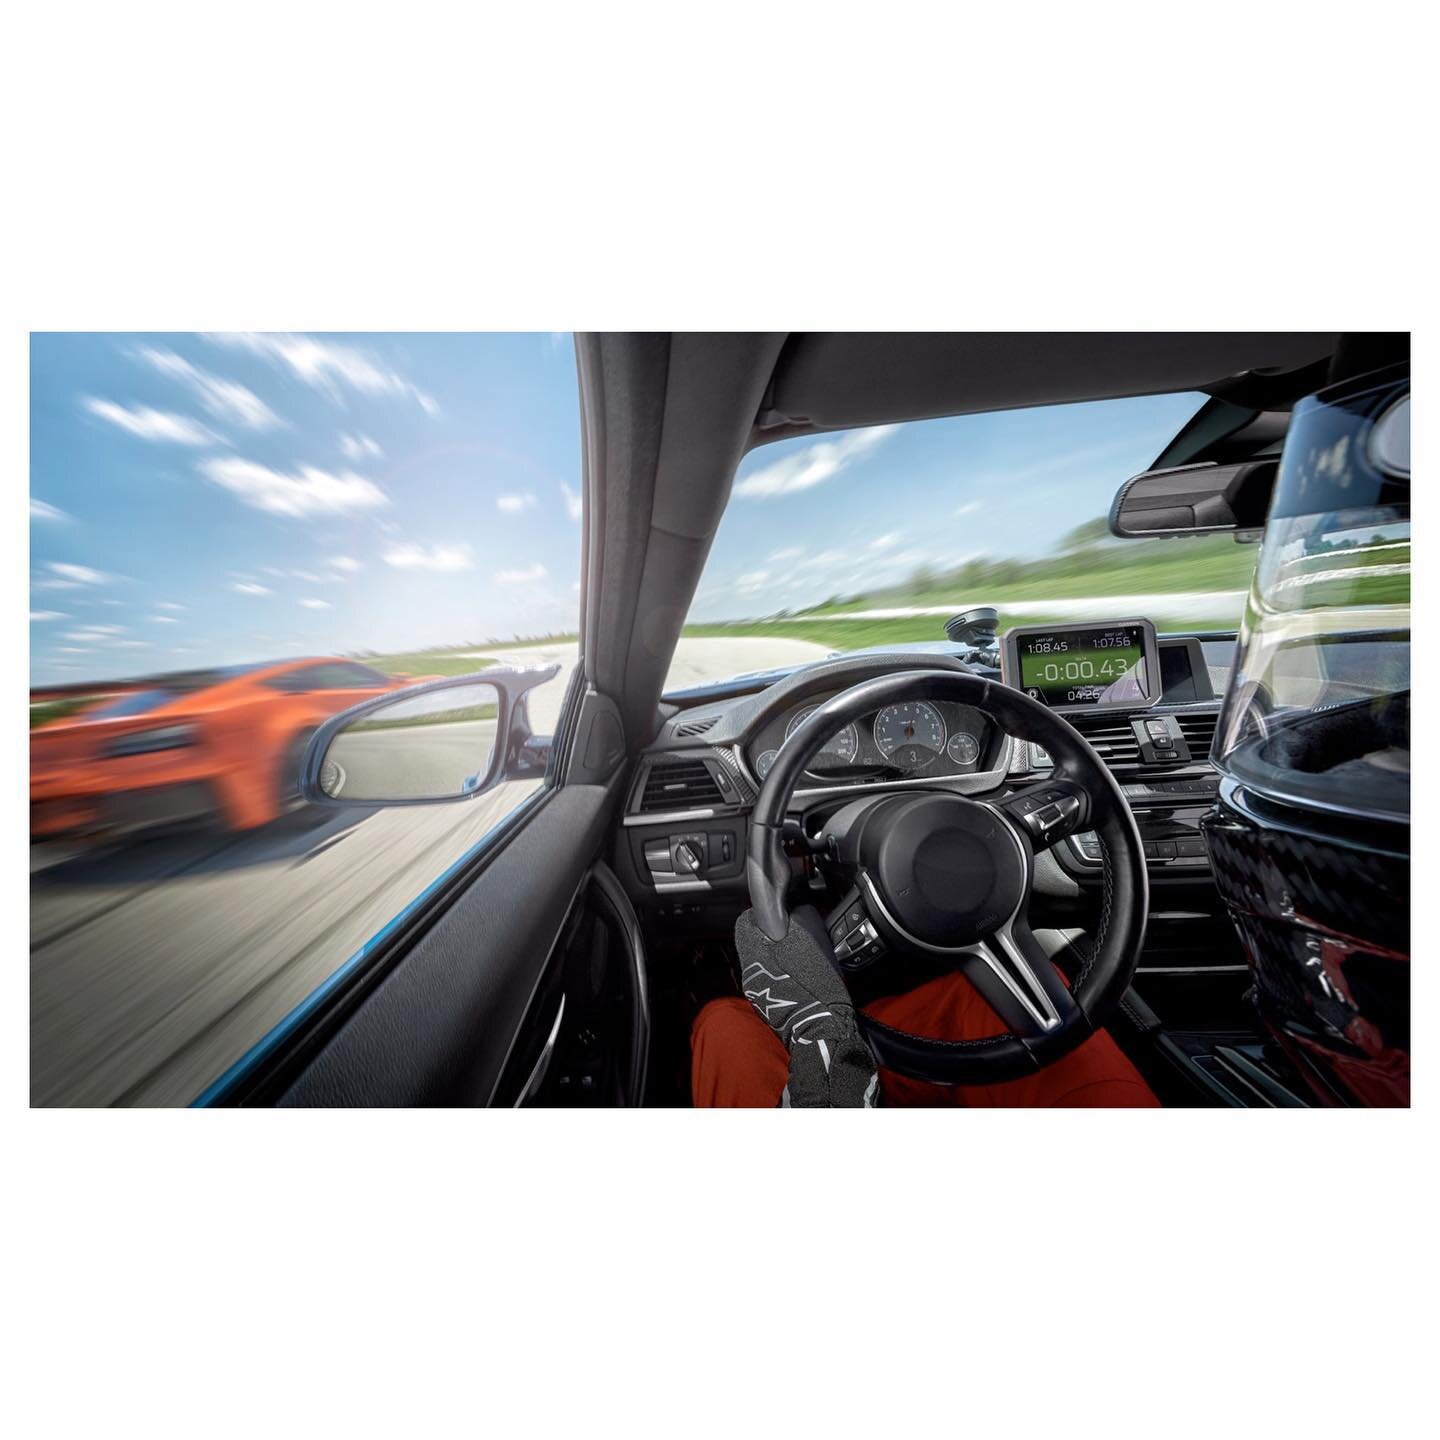 New work out for @garmin. We shot this last summer out in Topeka on a hot track with a bunch of very cool cars!  Excited to see these images trickle out into the world!